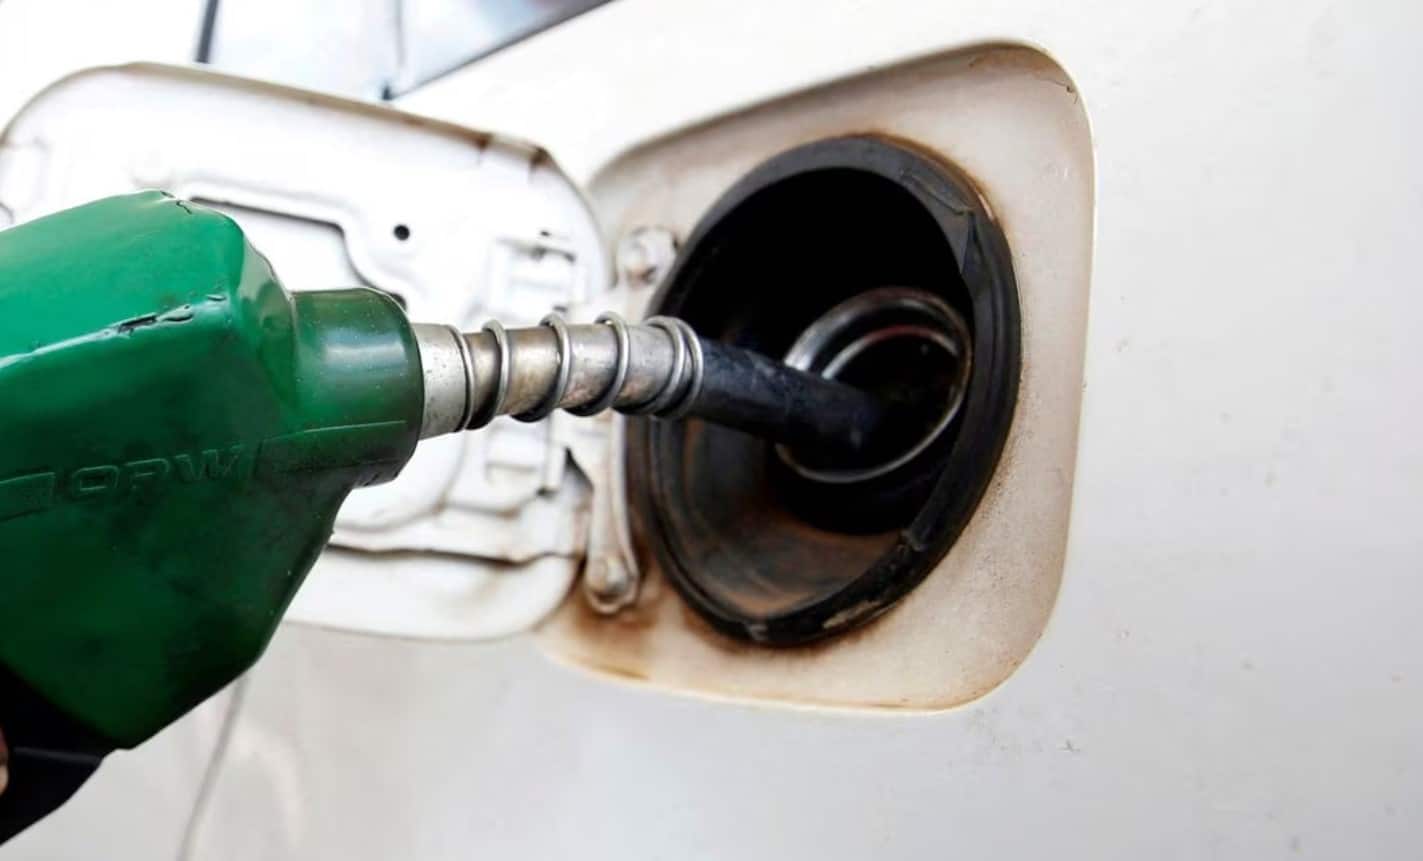 image North fuel shoppers face €4 fine per litre (Updated)